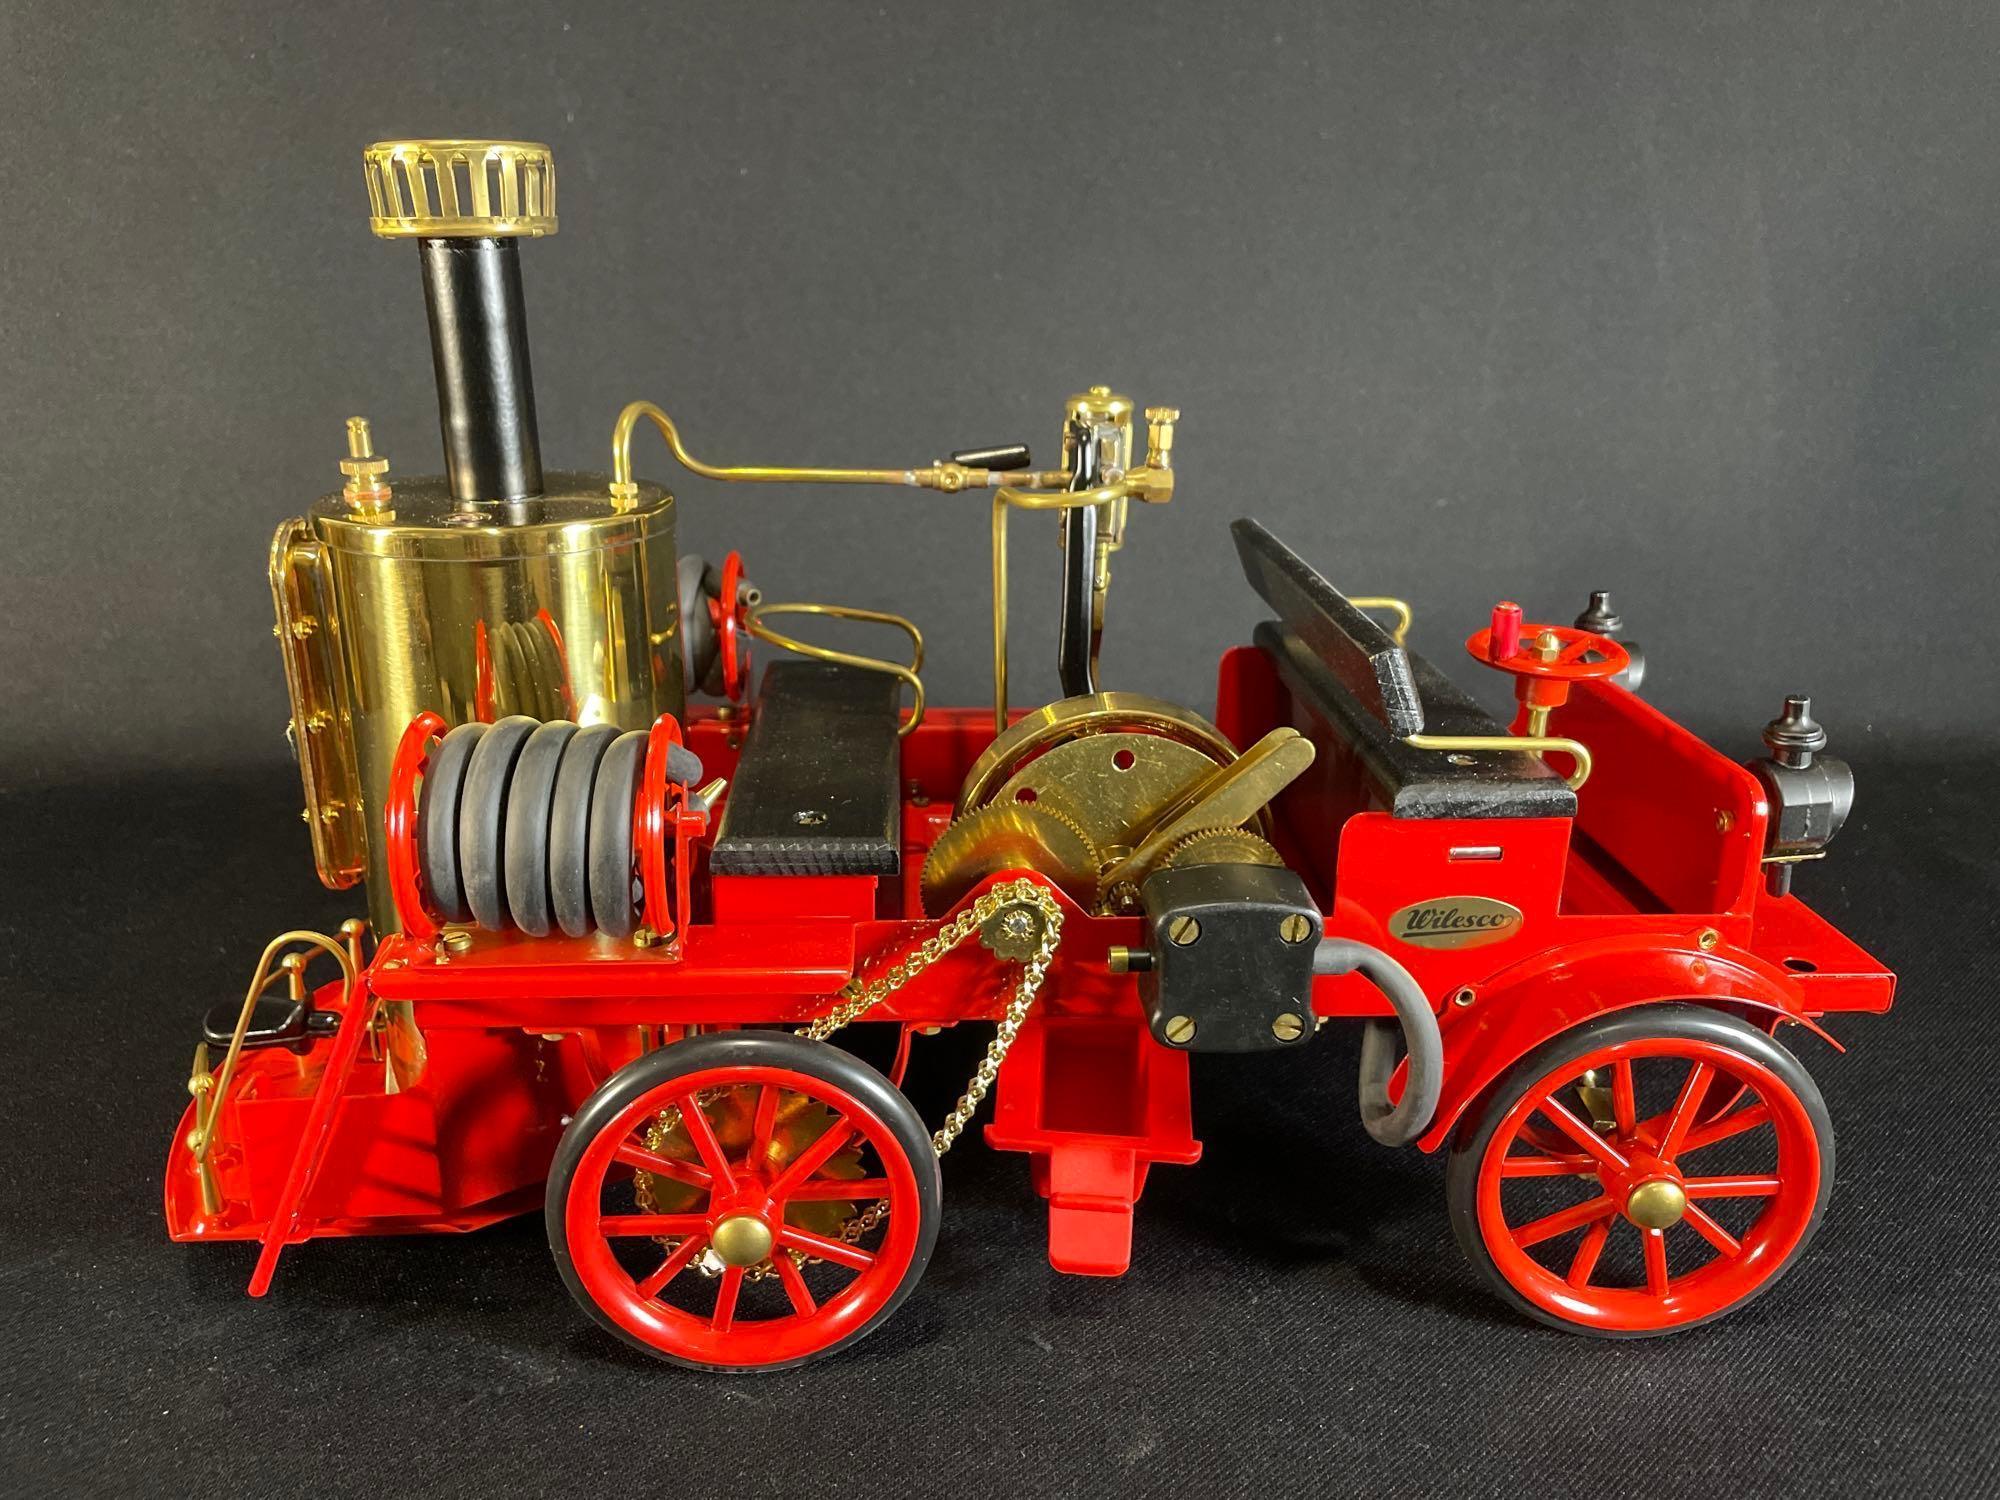 Wilesco Live steam fire truck made in Germany